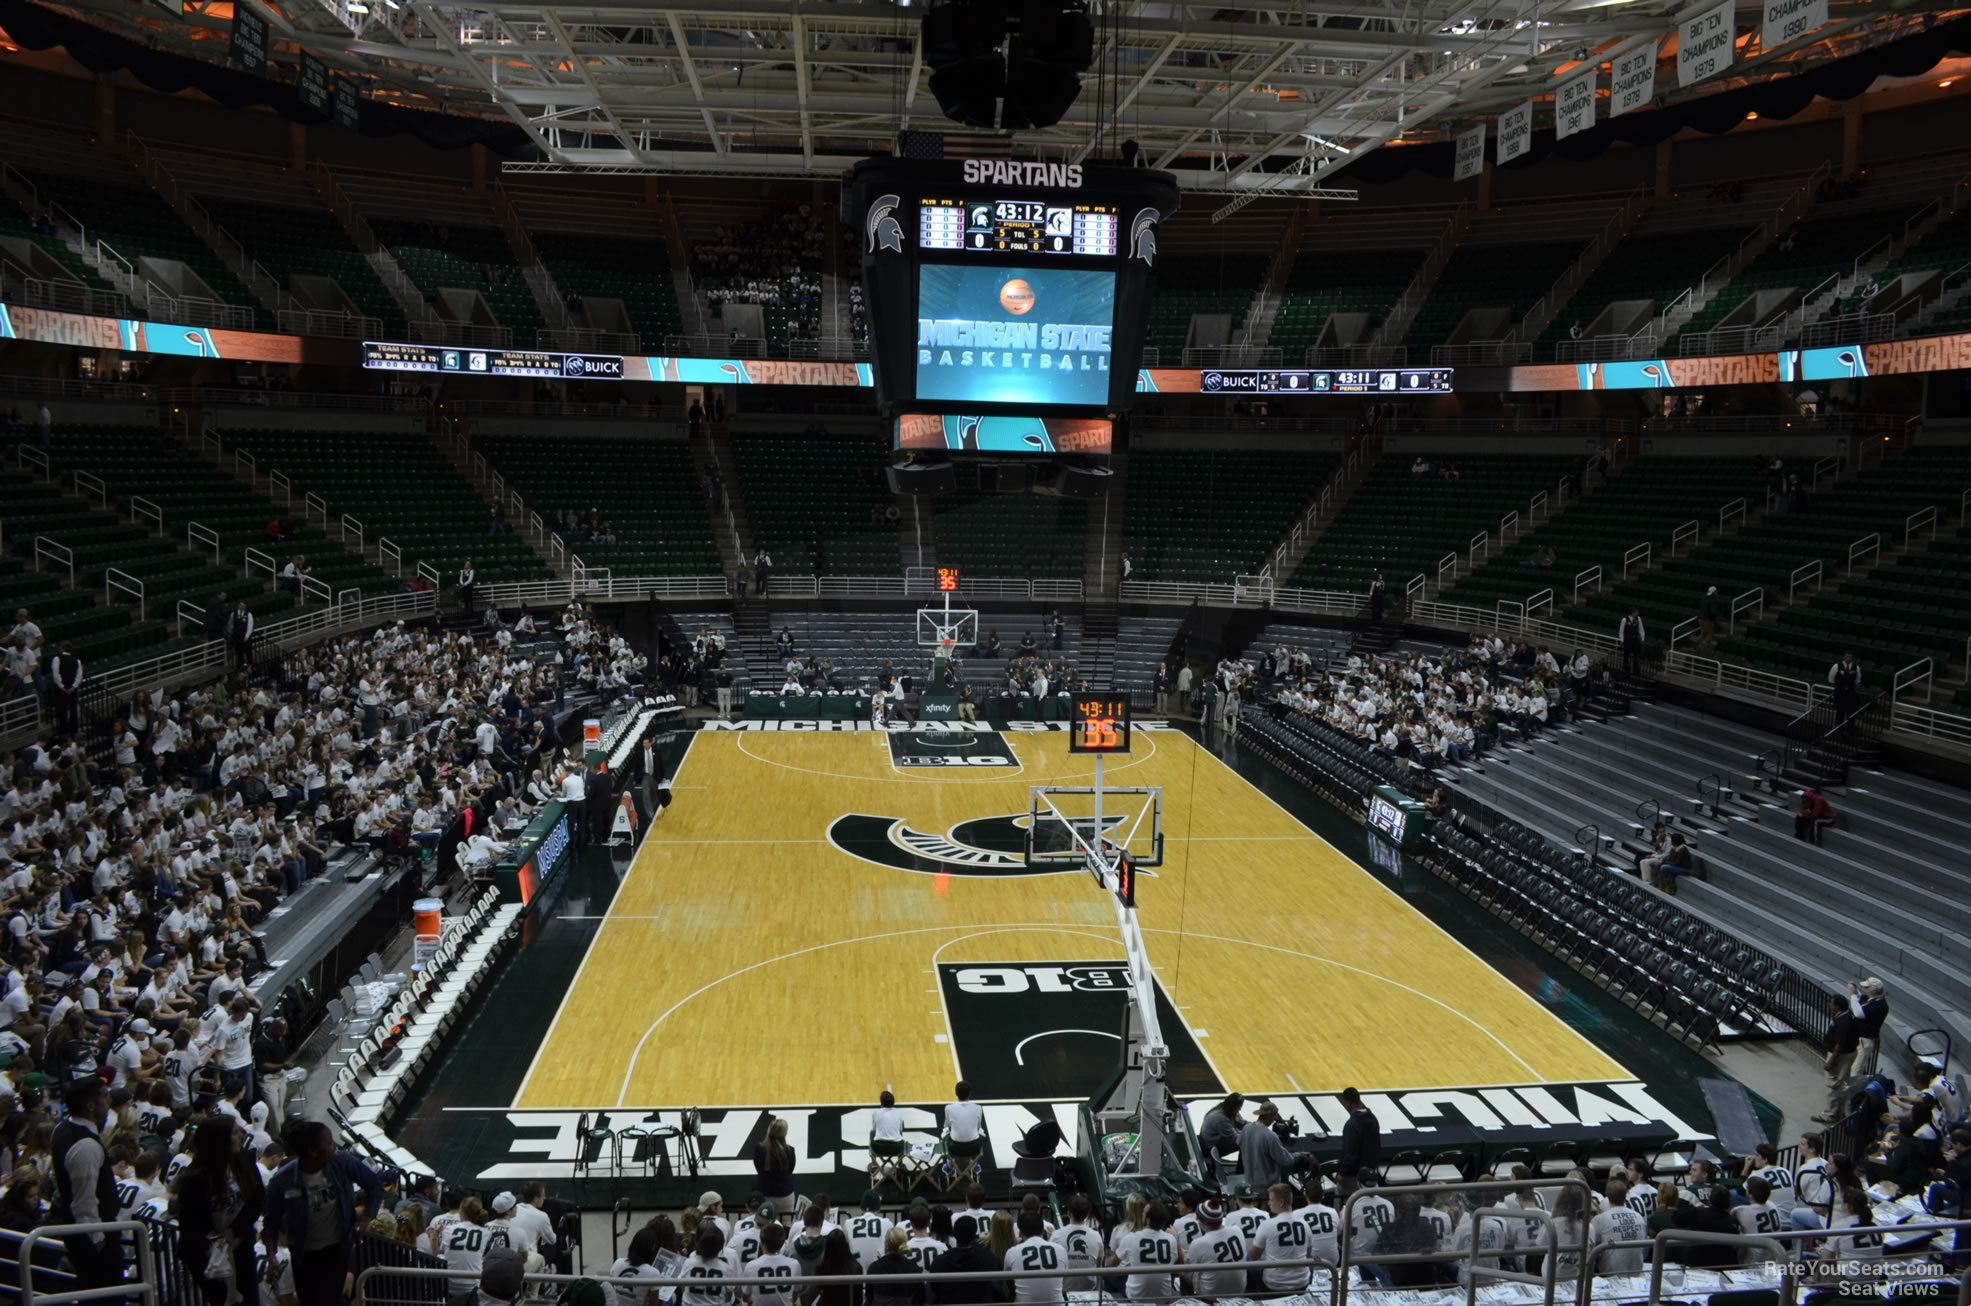 section 102, row 22 seat view  - breslin center